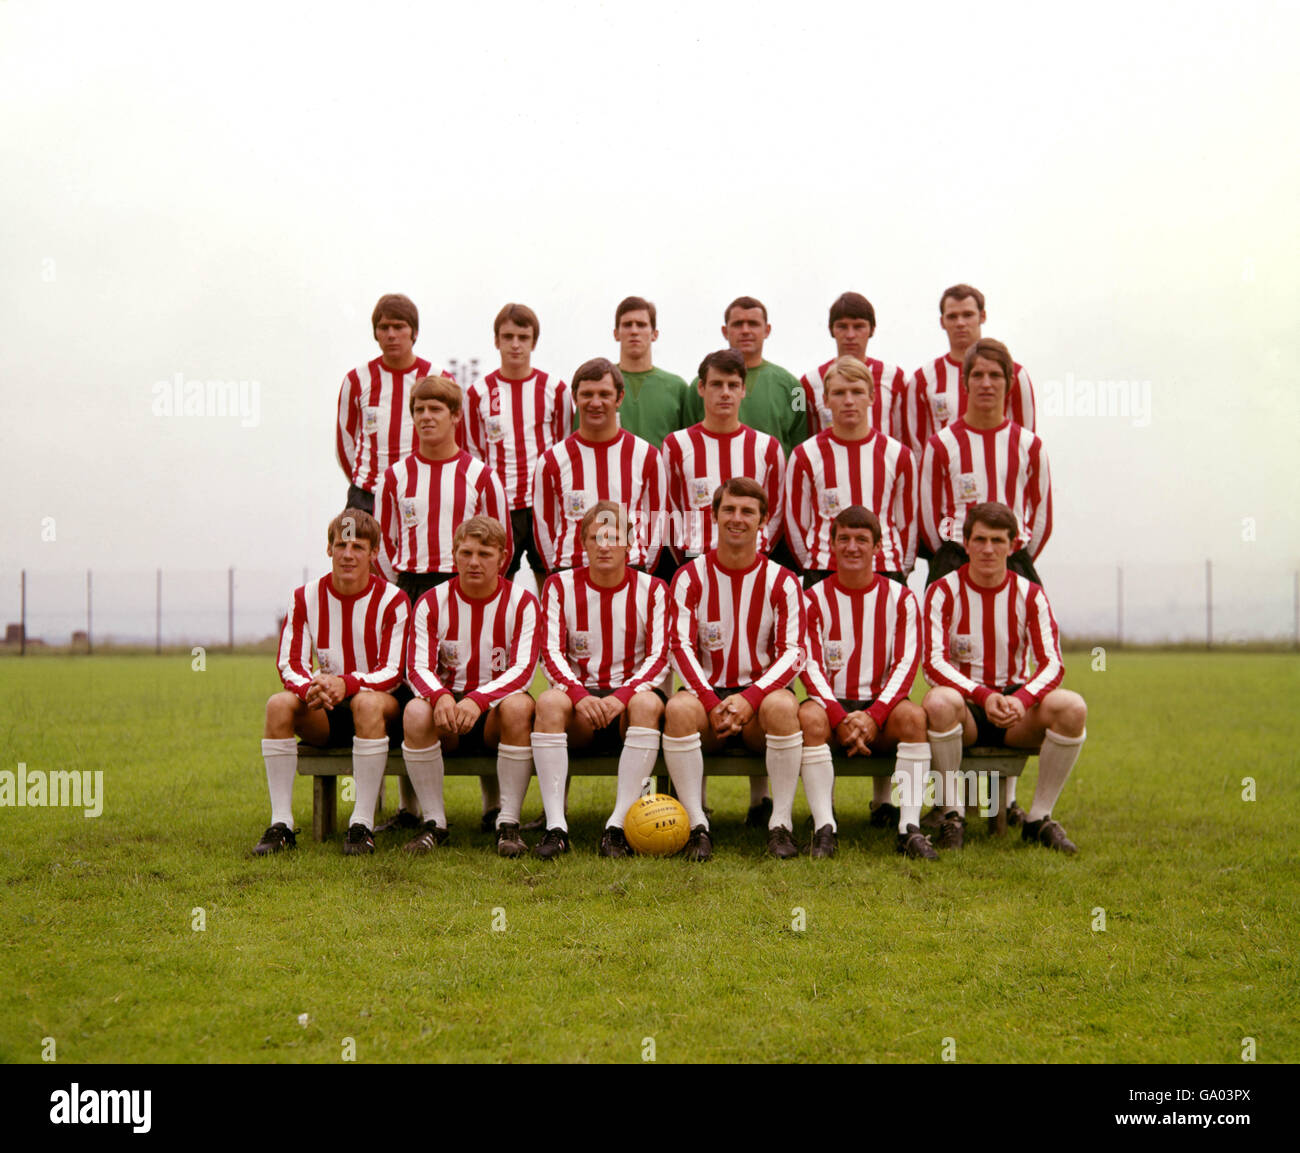 Sheffield United First-Team Squad Back row: Barry Wagstaff, Barlow, Hodgkinson, Gordine, Cliff and Monks. Middle Row: Hill, Currie, Fencoughty, Mallinder and Shaw. Front Row: Woodward, Carling, addison, Badger, Bickley and Reece. Stock Photo